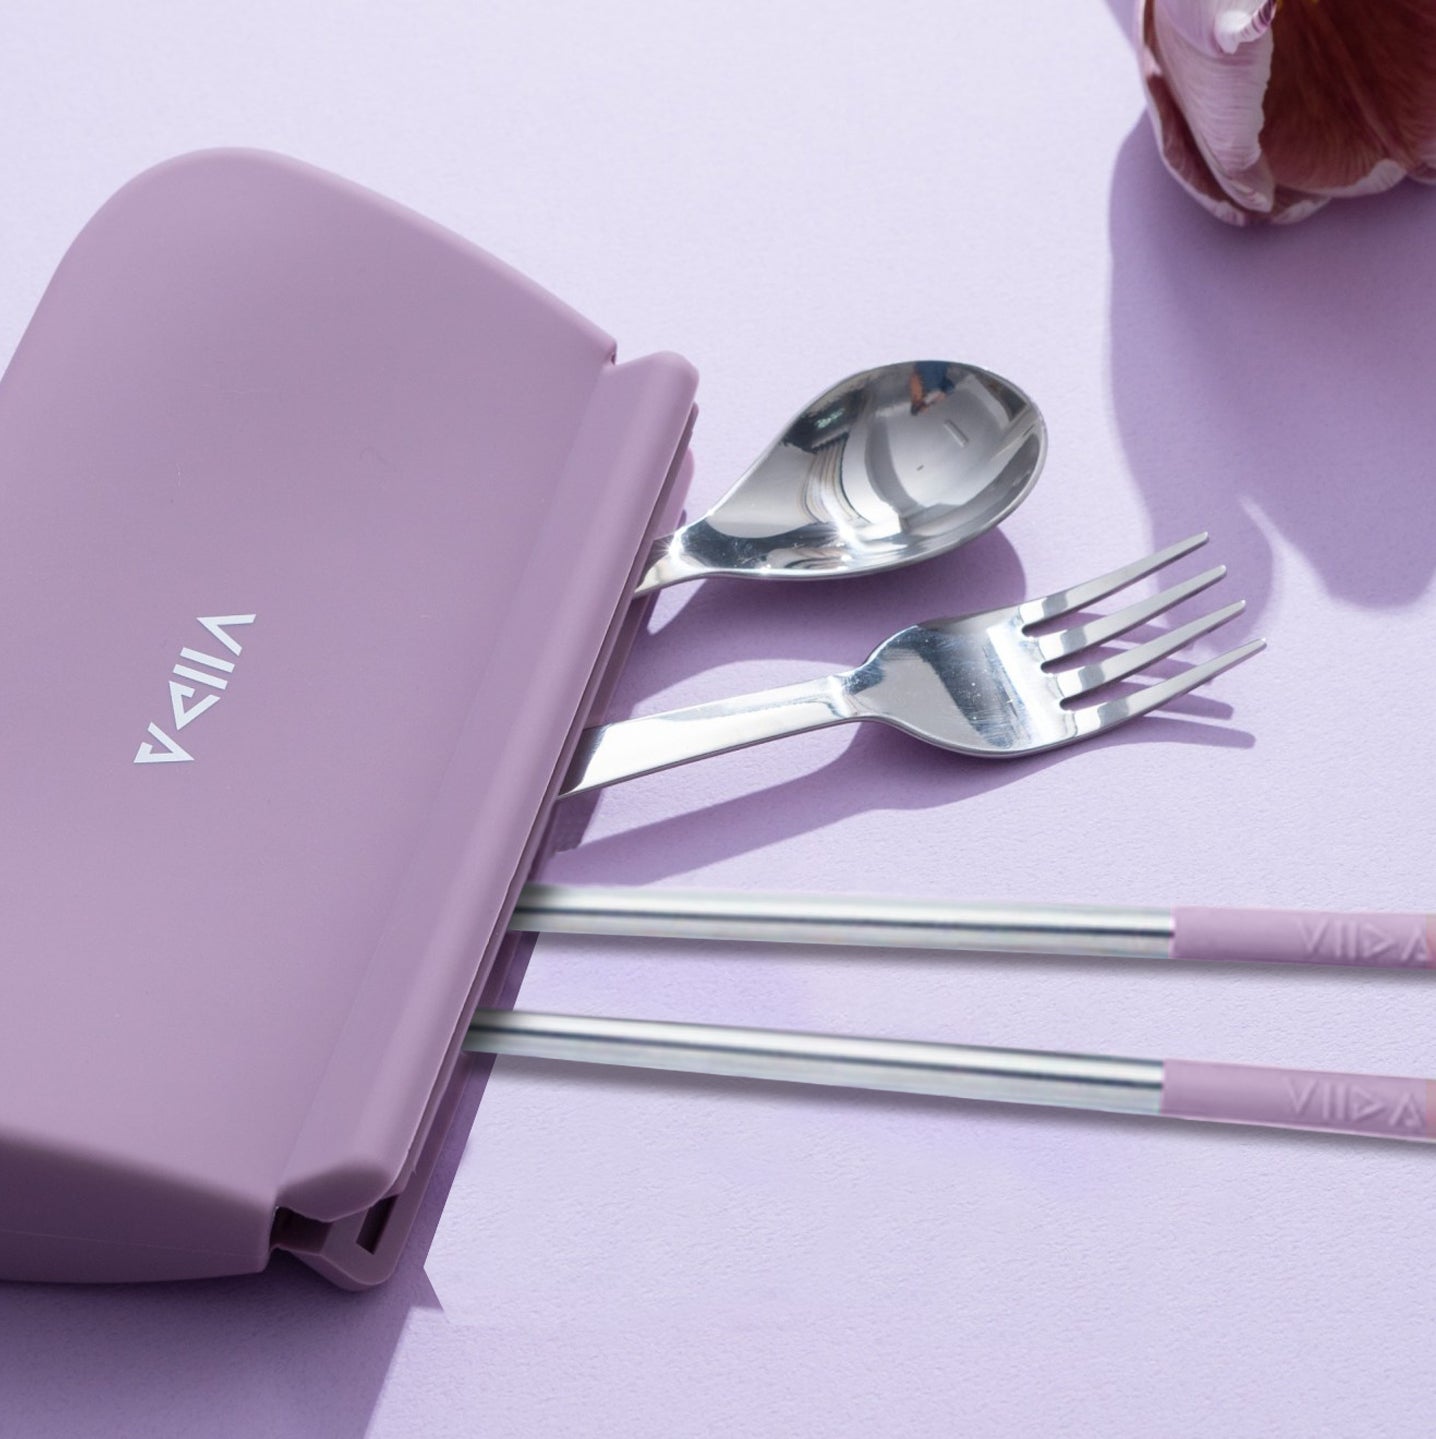 [VIIDA] Bundle Set Morgen 316 Stainless Steel Travel Cutleries Set with Chubby Food Grade Silicone Pouch XL Bundle Set of 4 (6 Colour)